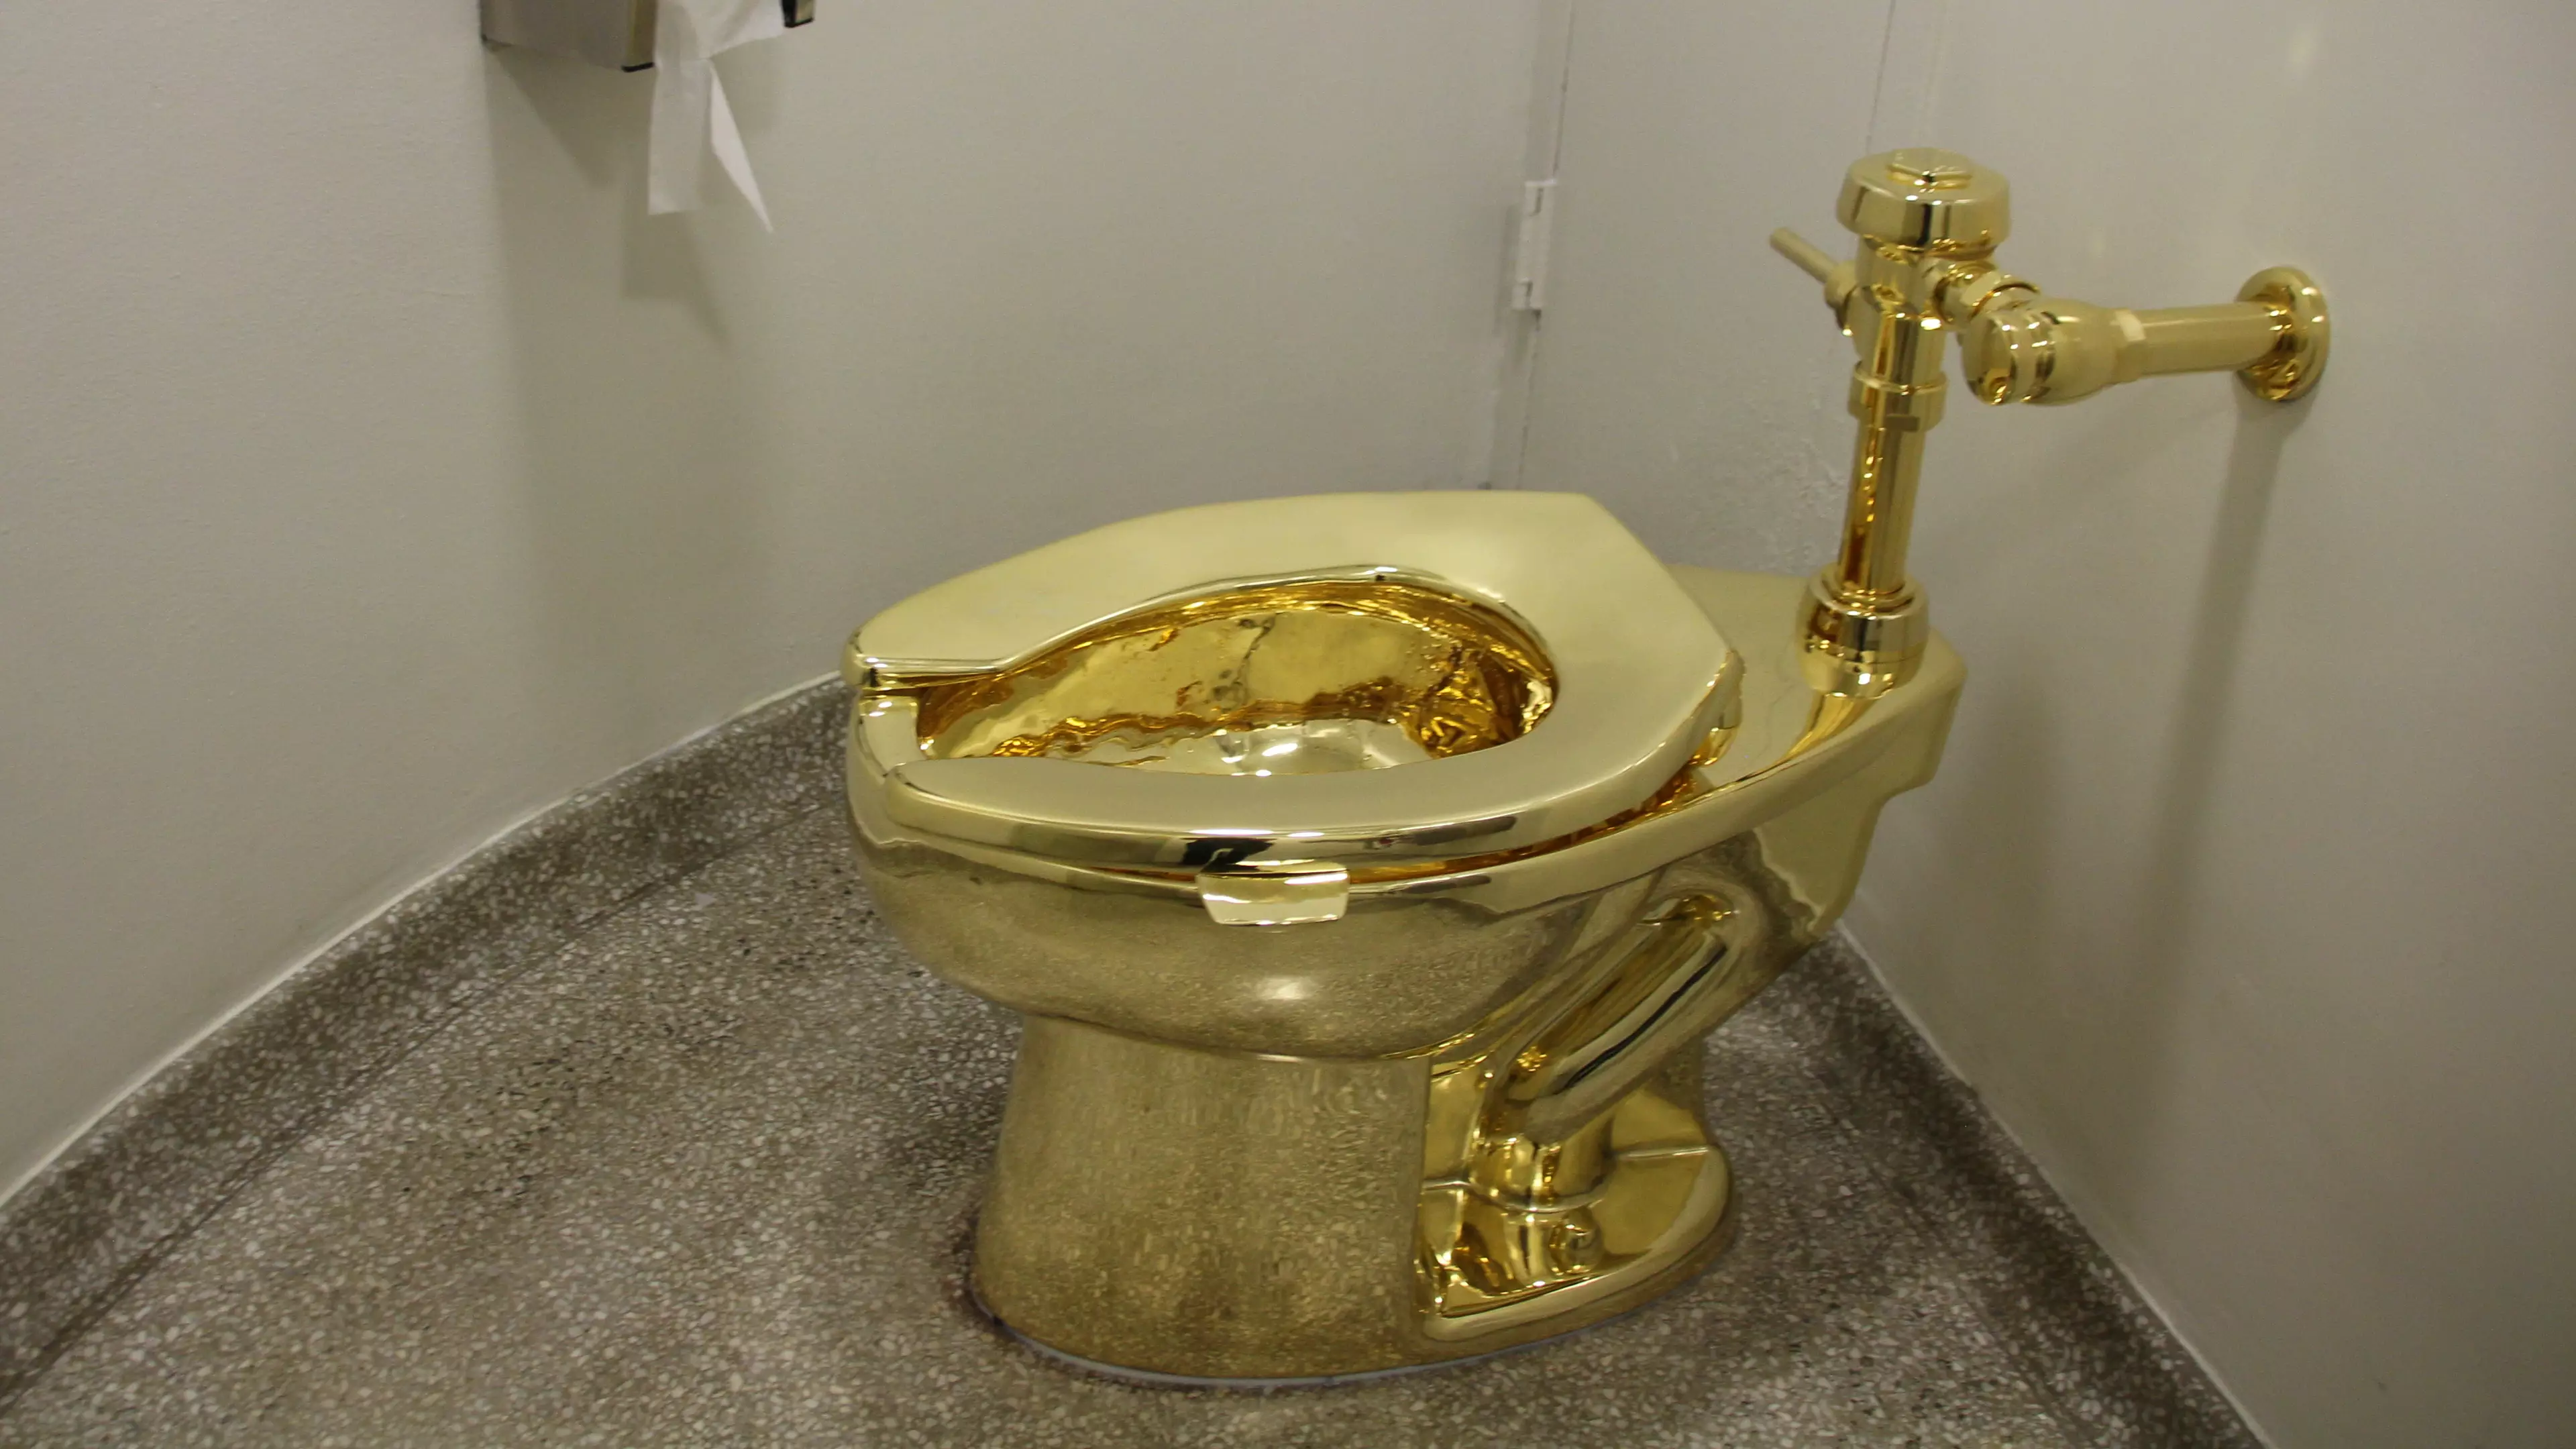 Thieves Steal 18-Carat Gold Toilet Worth £1m From Blenheim Palace